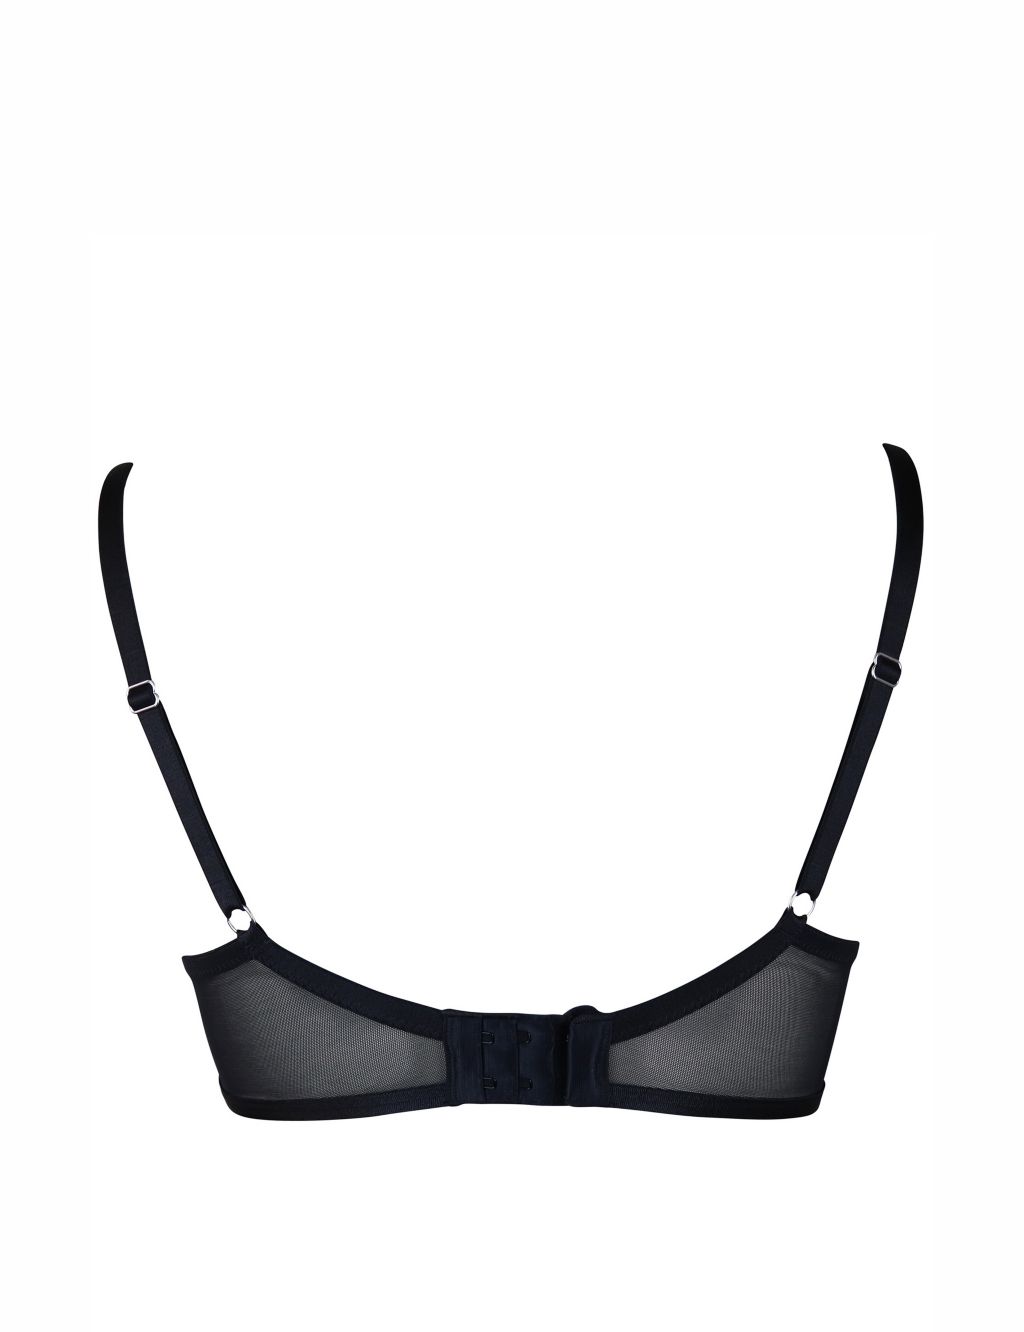 Viva Luxe Mesh Wired Full Cup Bra D-J image 6